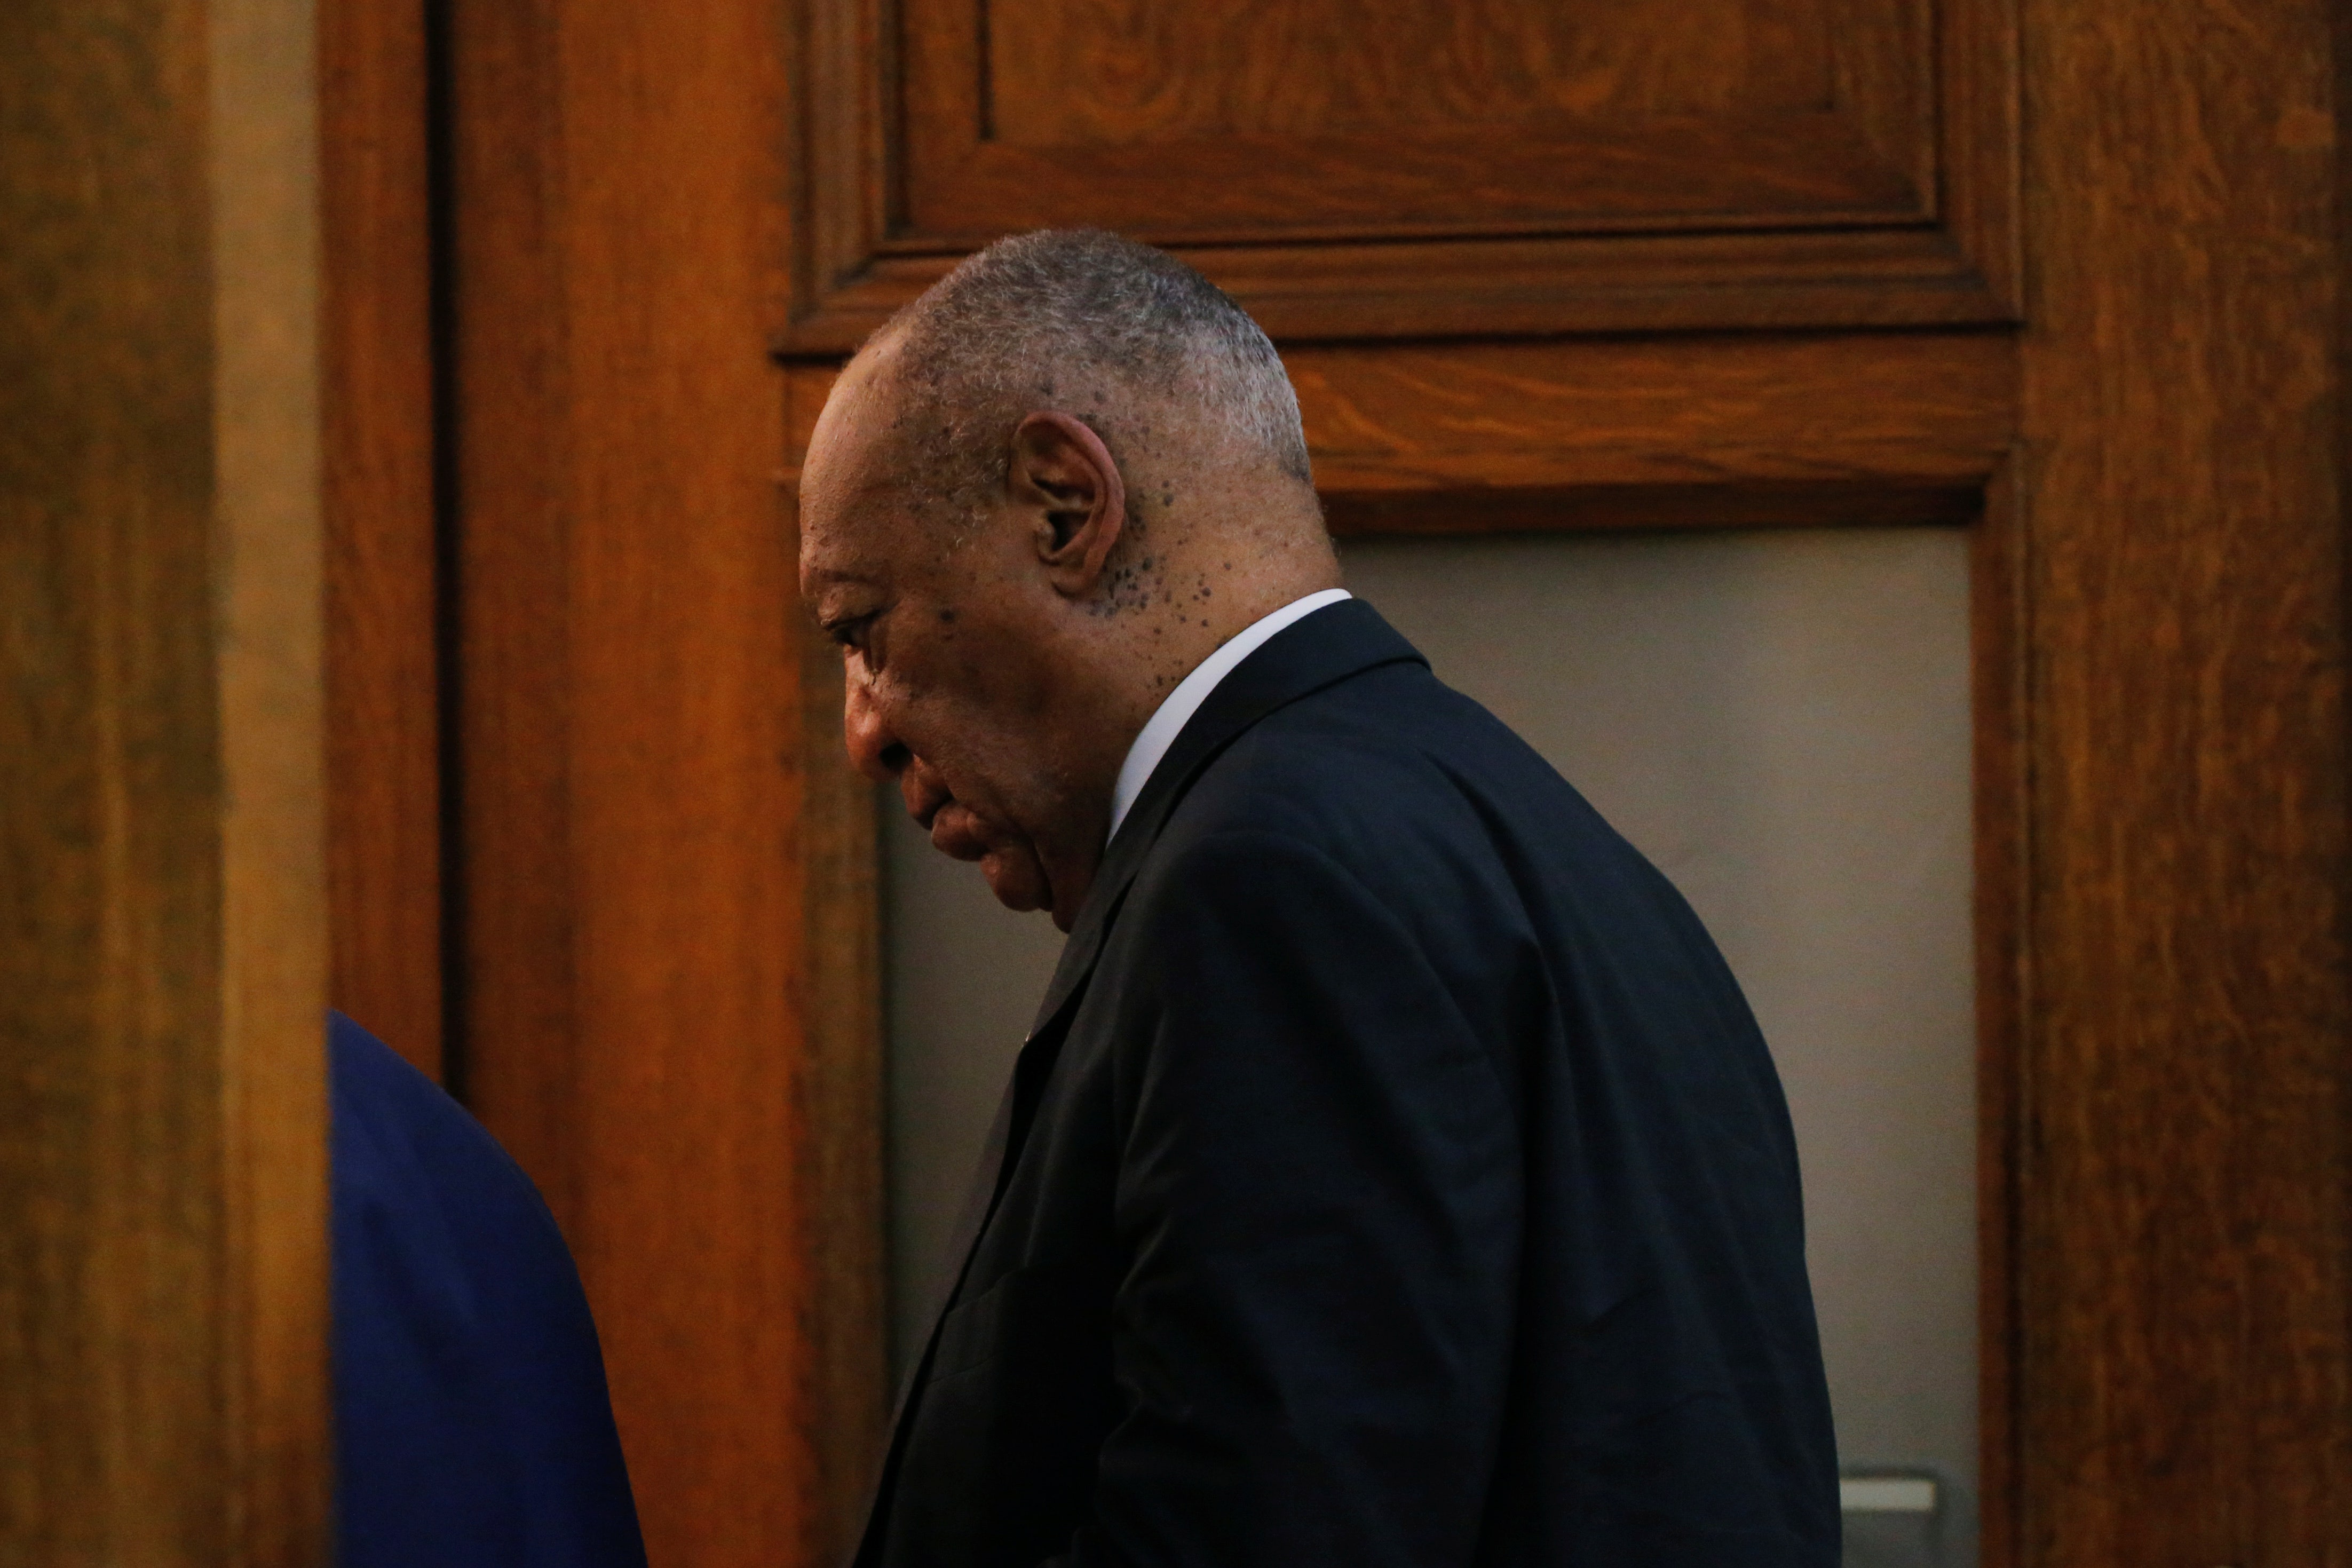 Bill Cosby civil trial jury will have to restart deliberations after nearly reaching verdict – Fox News